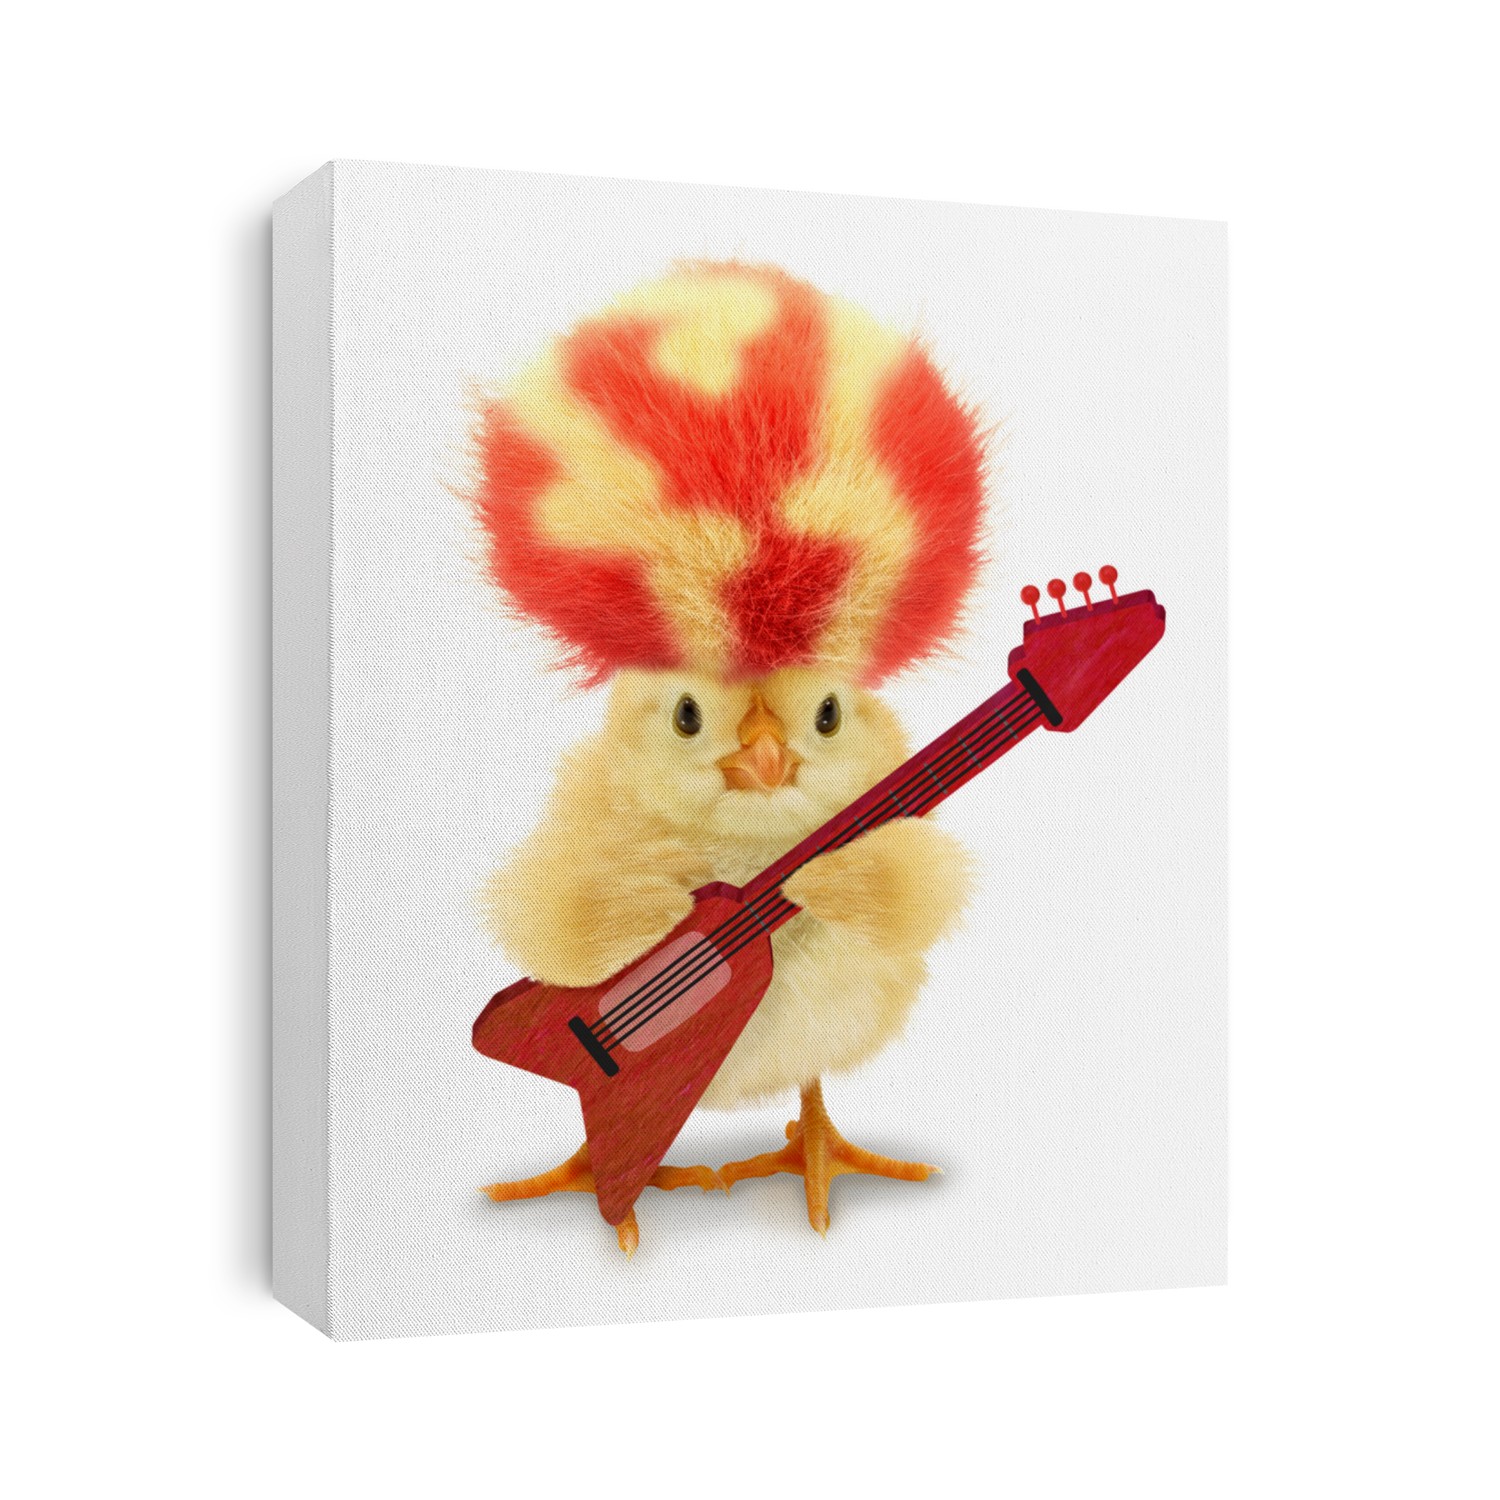 Cute cool chick musician with crazy red yellow hair and electric guitar funny conceptual image